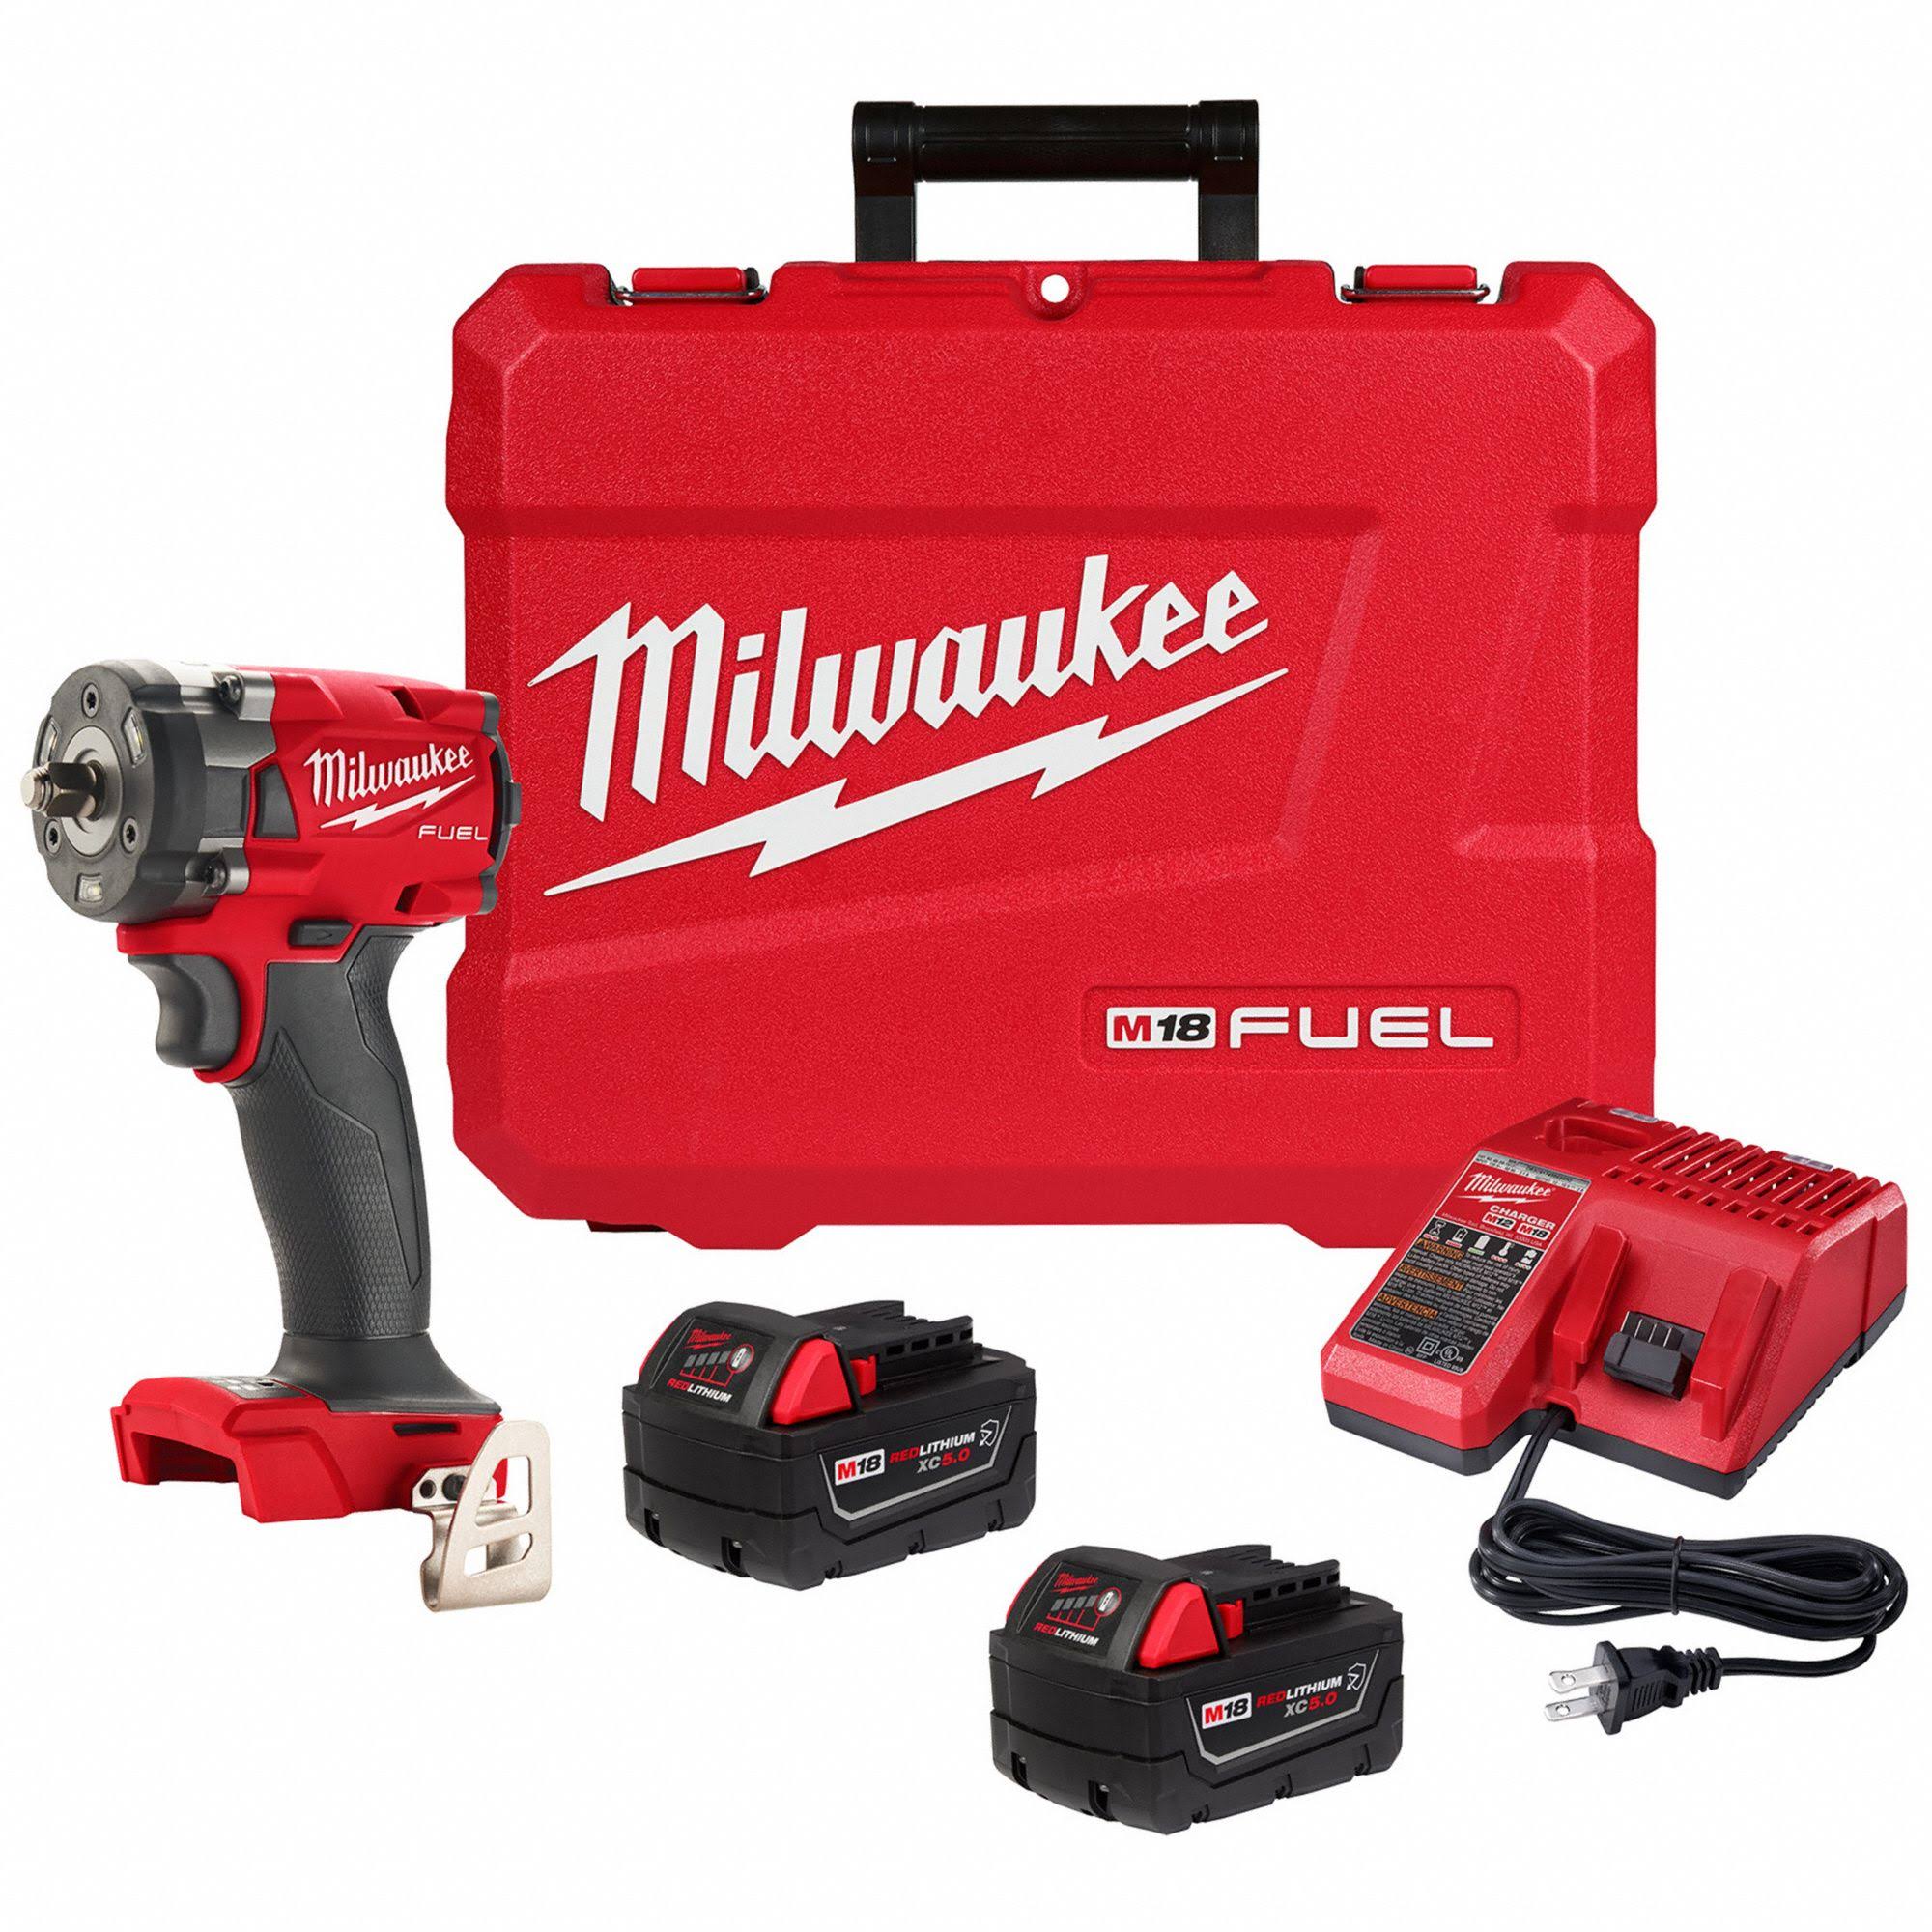 Milwaukee 2854-22R M18 FUEL 3/8" Compact Impact Wrench Kit